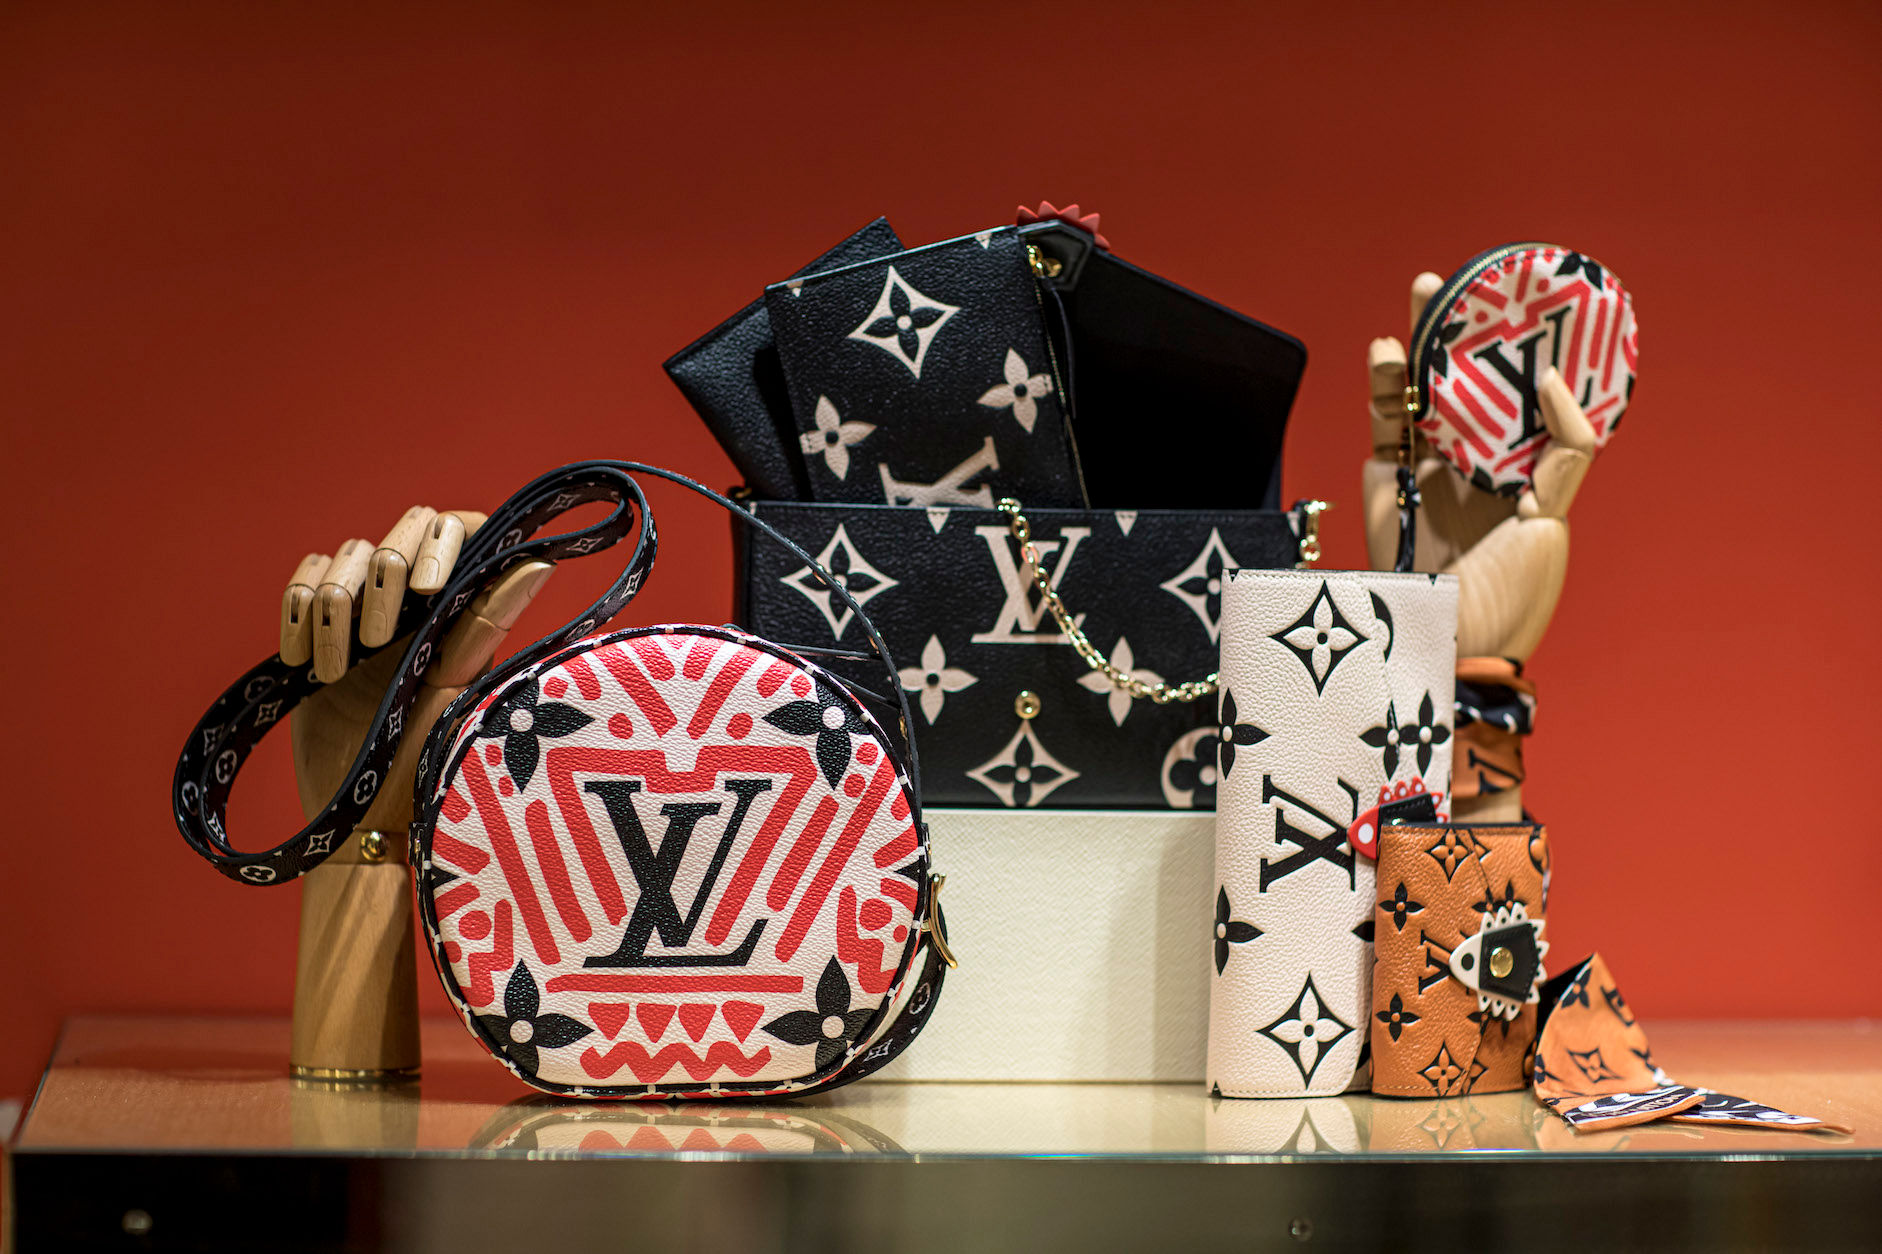 You Can Now Shop Louis Vuitton On Its Singapore Website—And Have